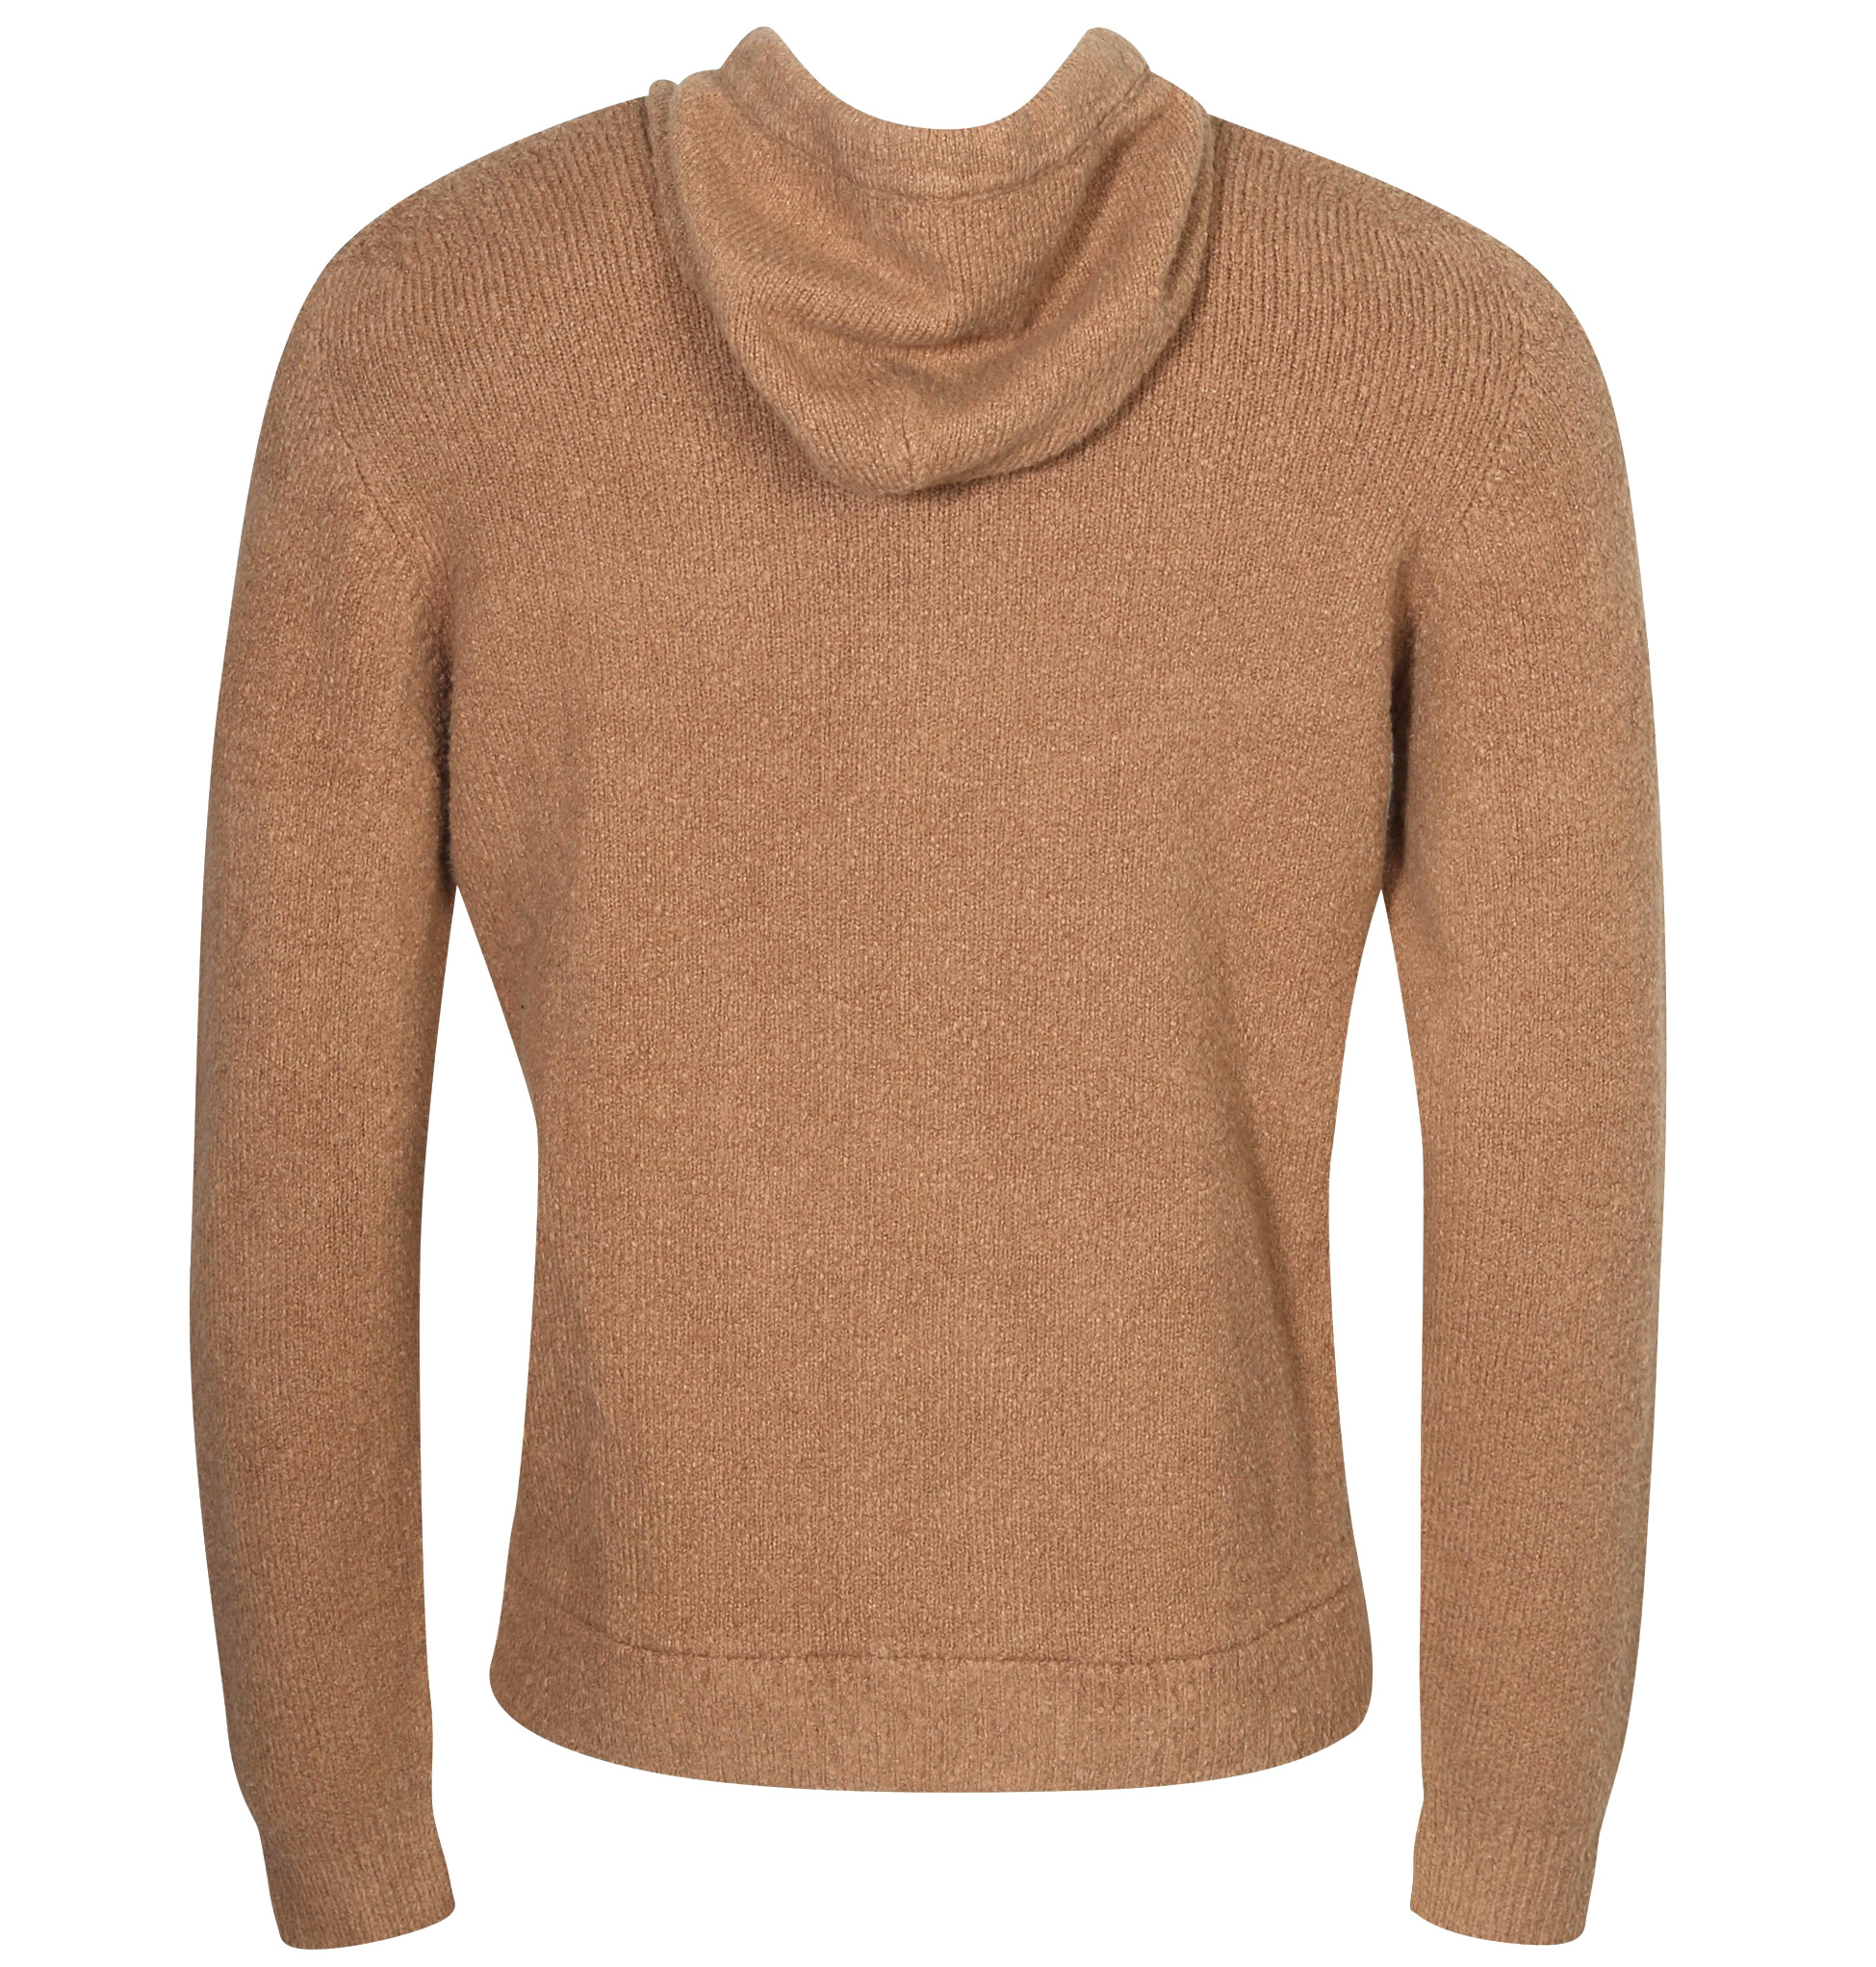 ROBERTO COLLINA Fluffy Cotton Knit Zip Hoodie in Washed Camel 46